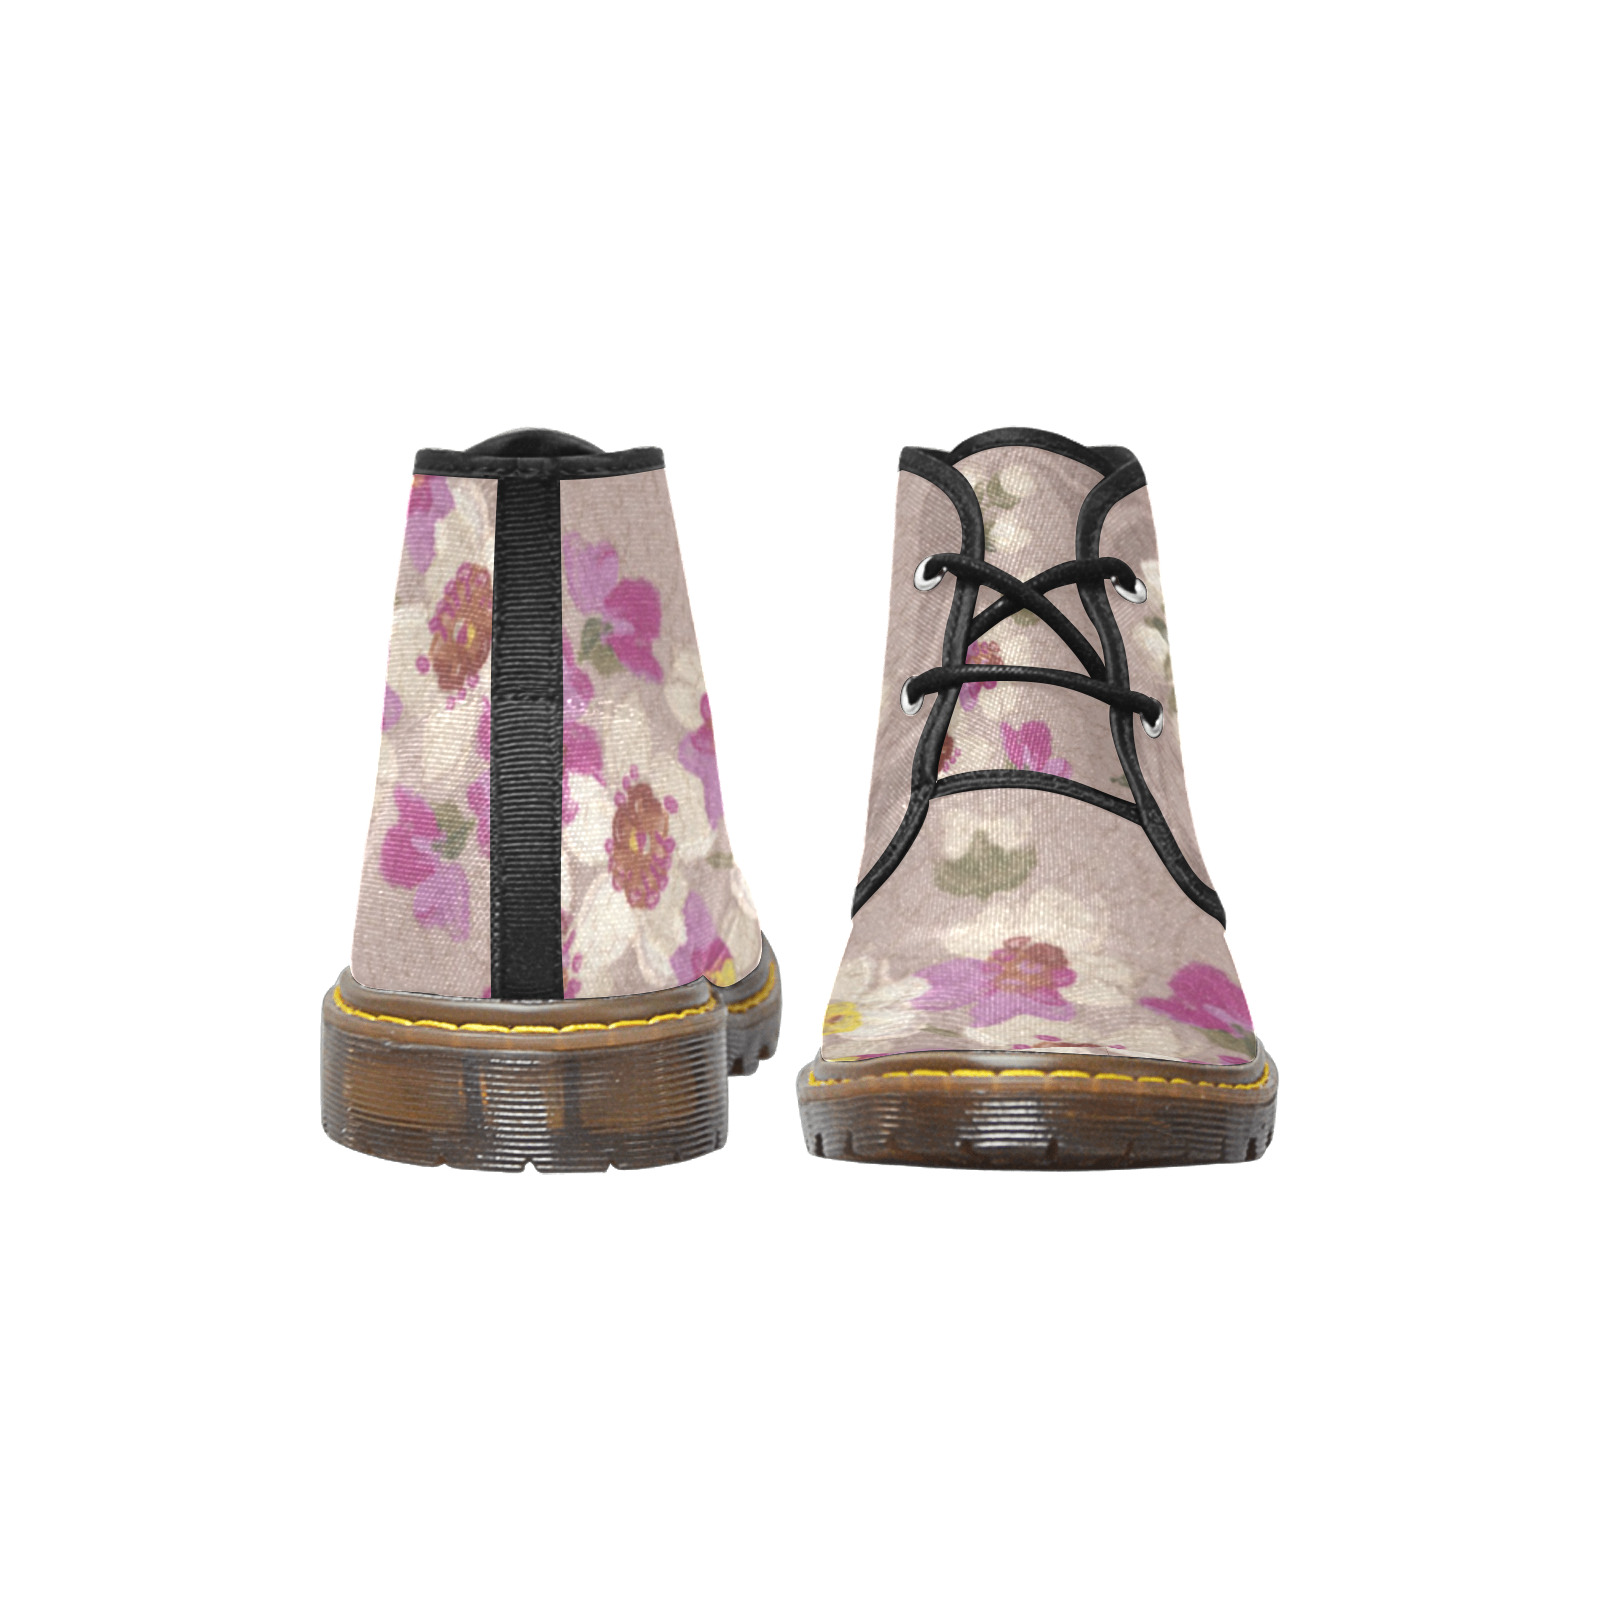 Flowers painting Women's Canvas Chukka Boots (Model 2402-1)